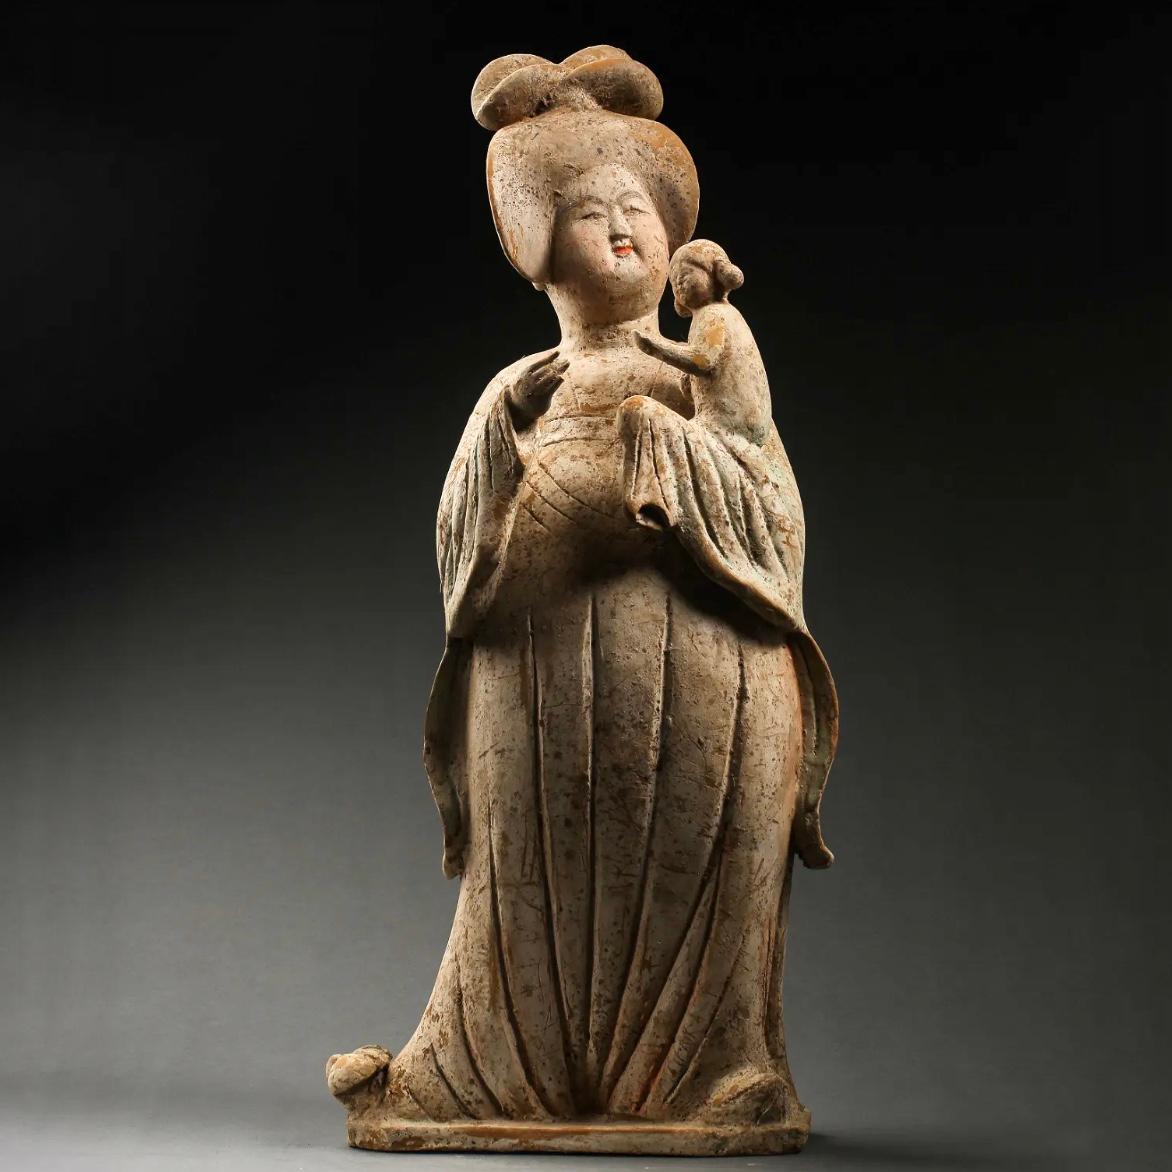 Tang Dynasty polychromed fat lady with child in arm. TL Tested
Terracotta, pottery with traces of orange and green paint 
Sui to Tang Dynasty (581-618)
Measures: Height: 20.2 inches (51cm)
Width: 9.45 inches (24cm)
Guaranteed Authentic with